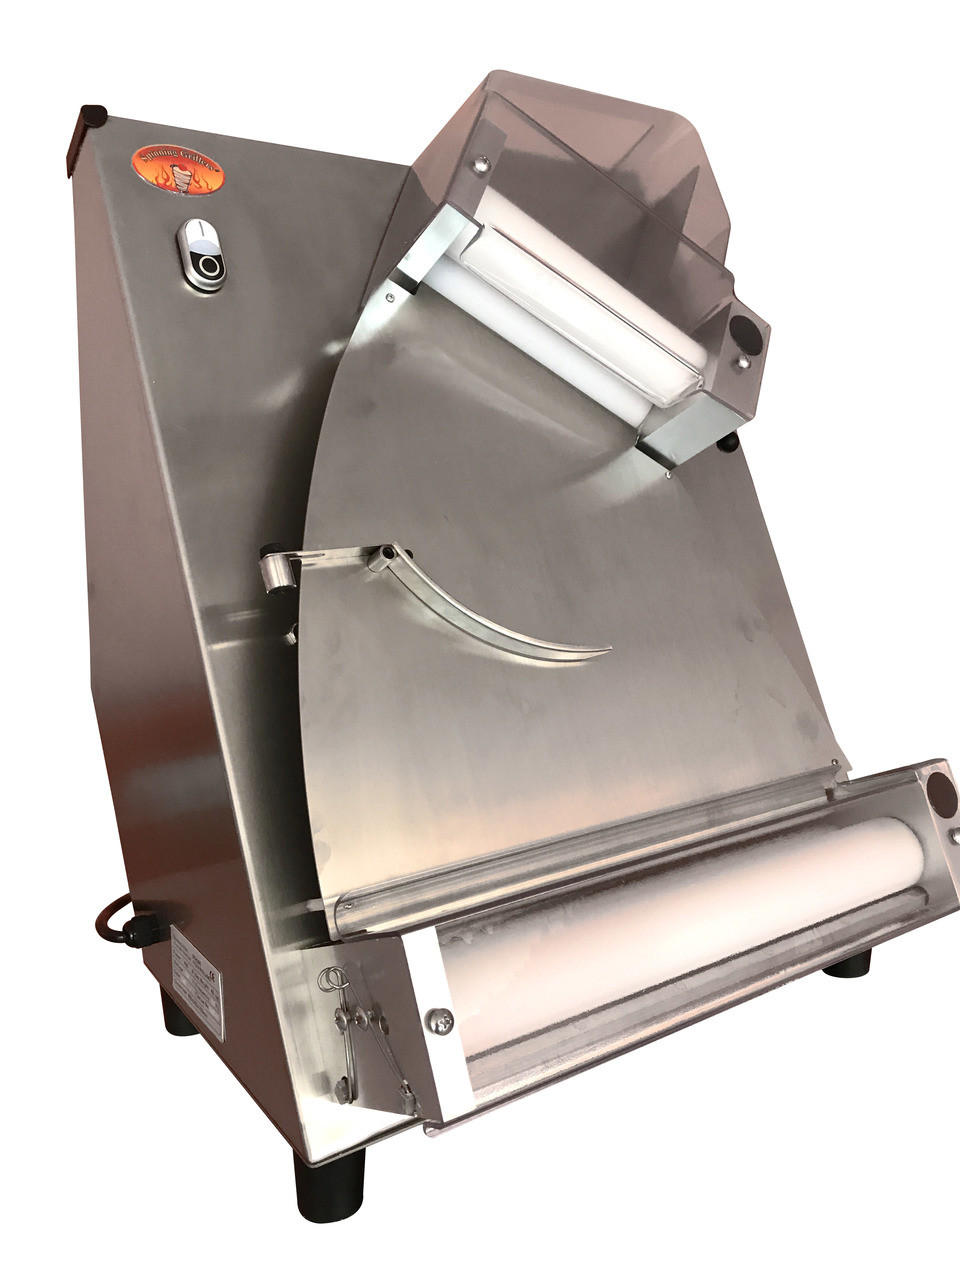 Pita Bread Oven - Naan Oven by Spinning Grillers- Large Capacity - خط خبز  عربي 